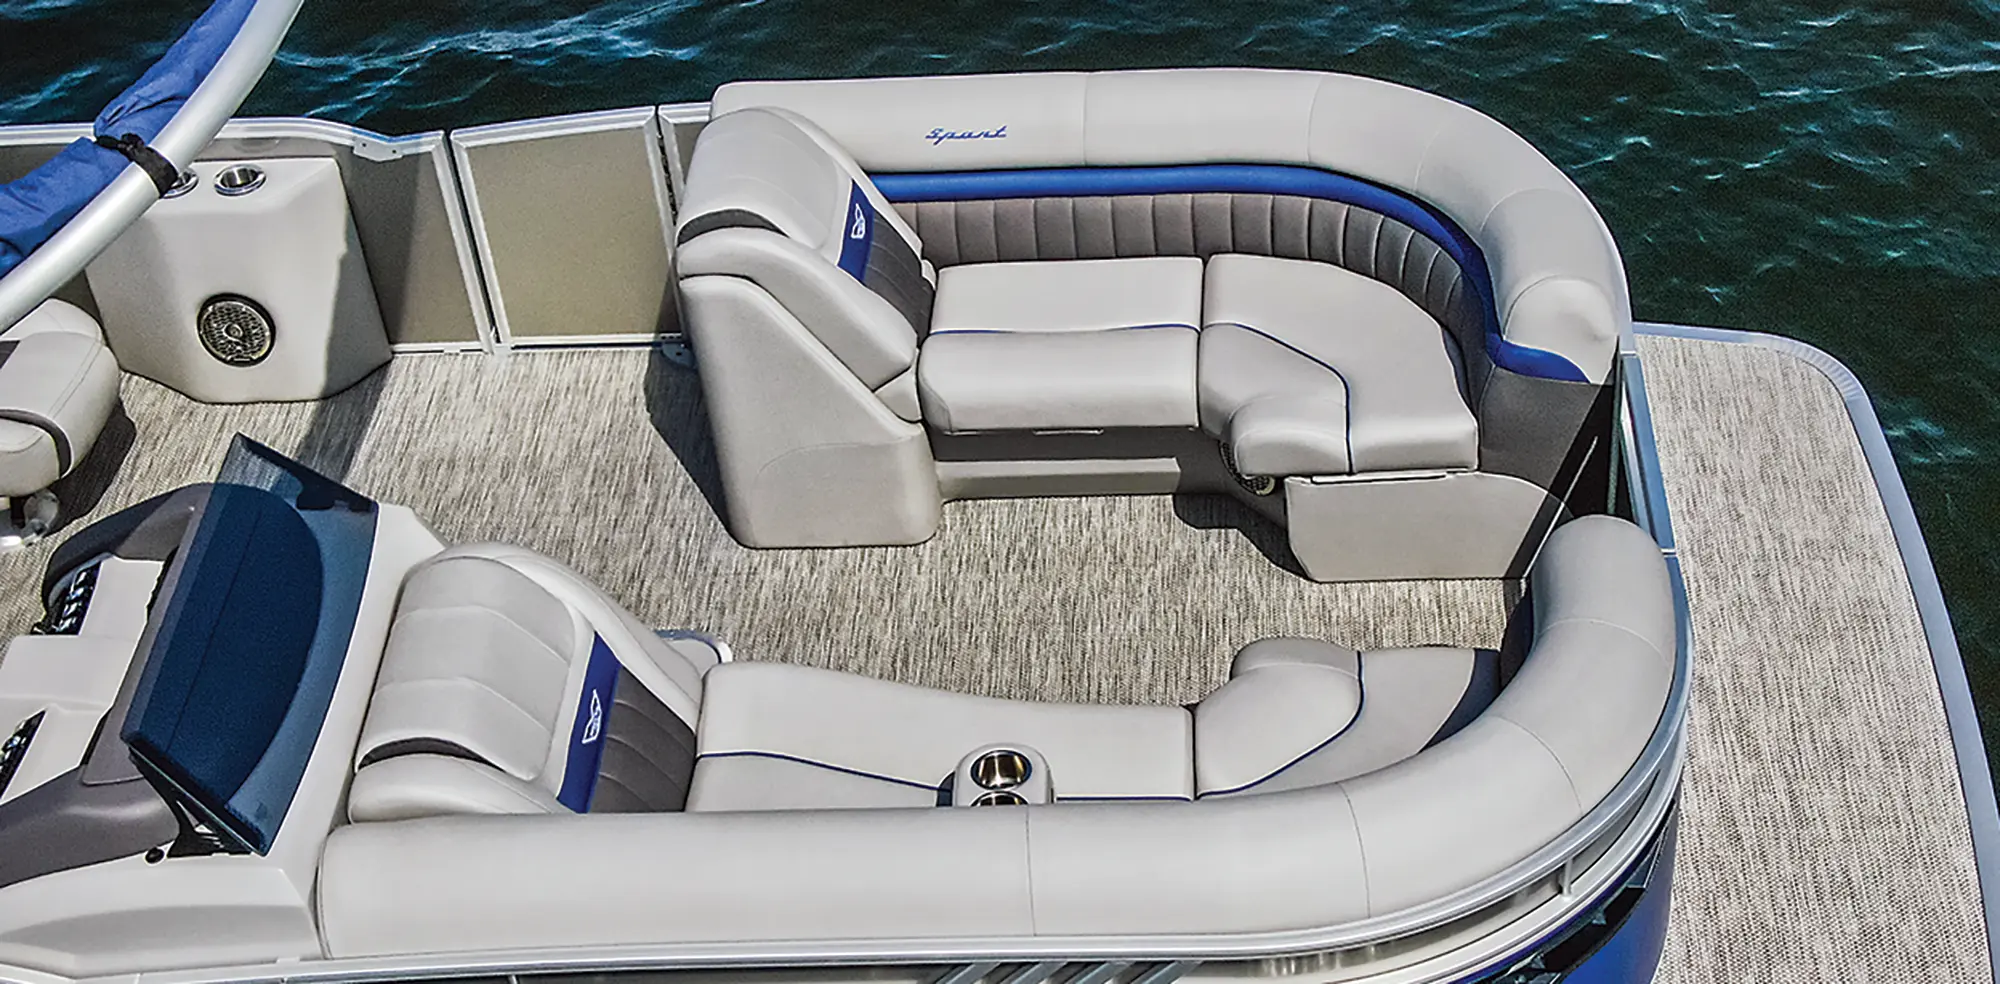 Aerial photograph view of the interior lounge couches area and driver's side area of the Bennington Sport 24 LXSSBA pontoon motorboat vehicle